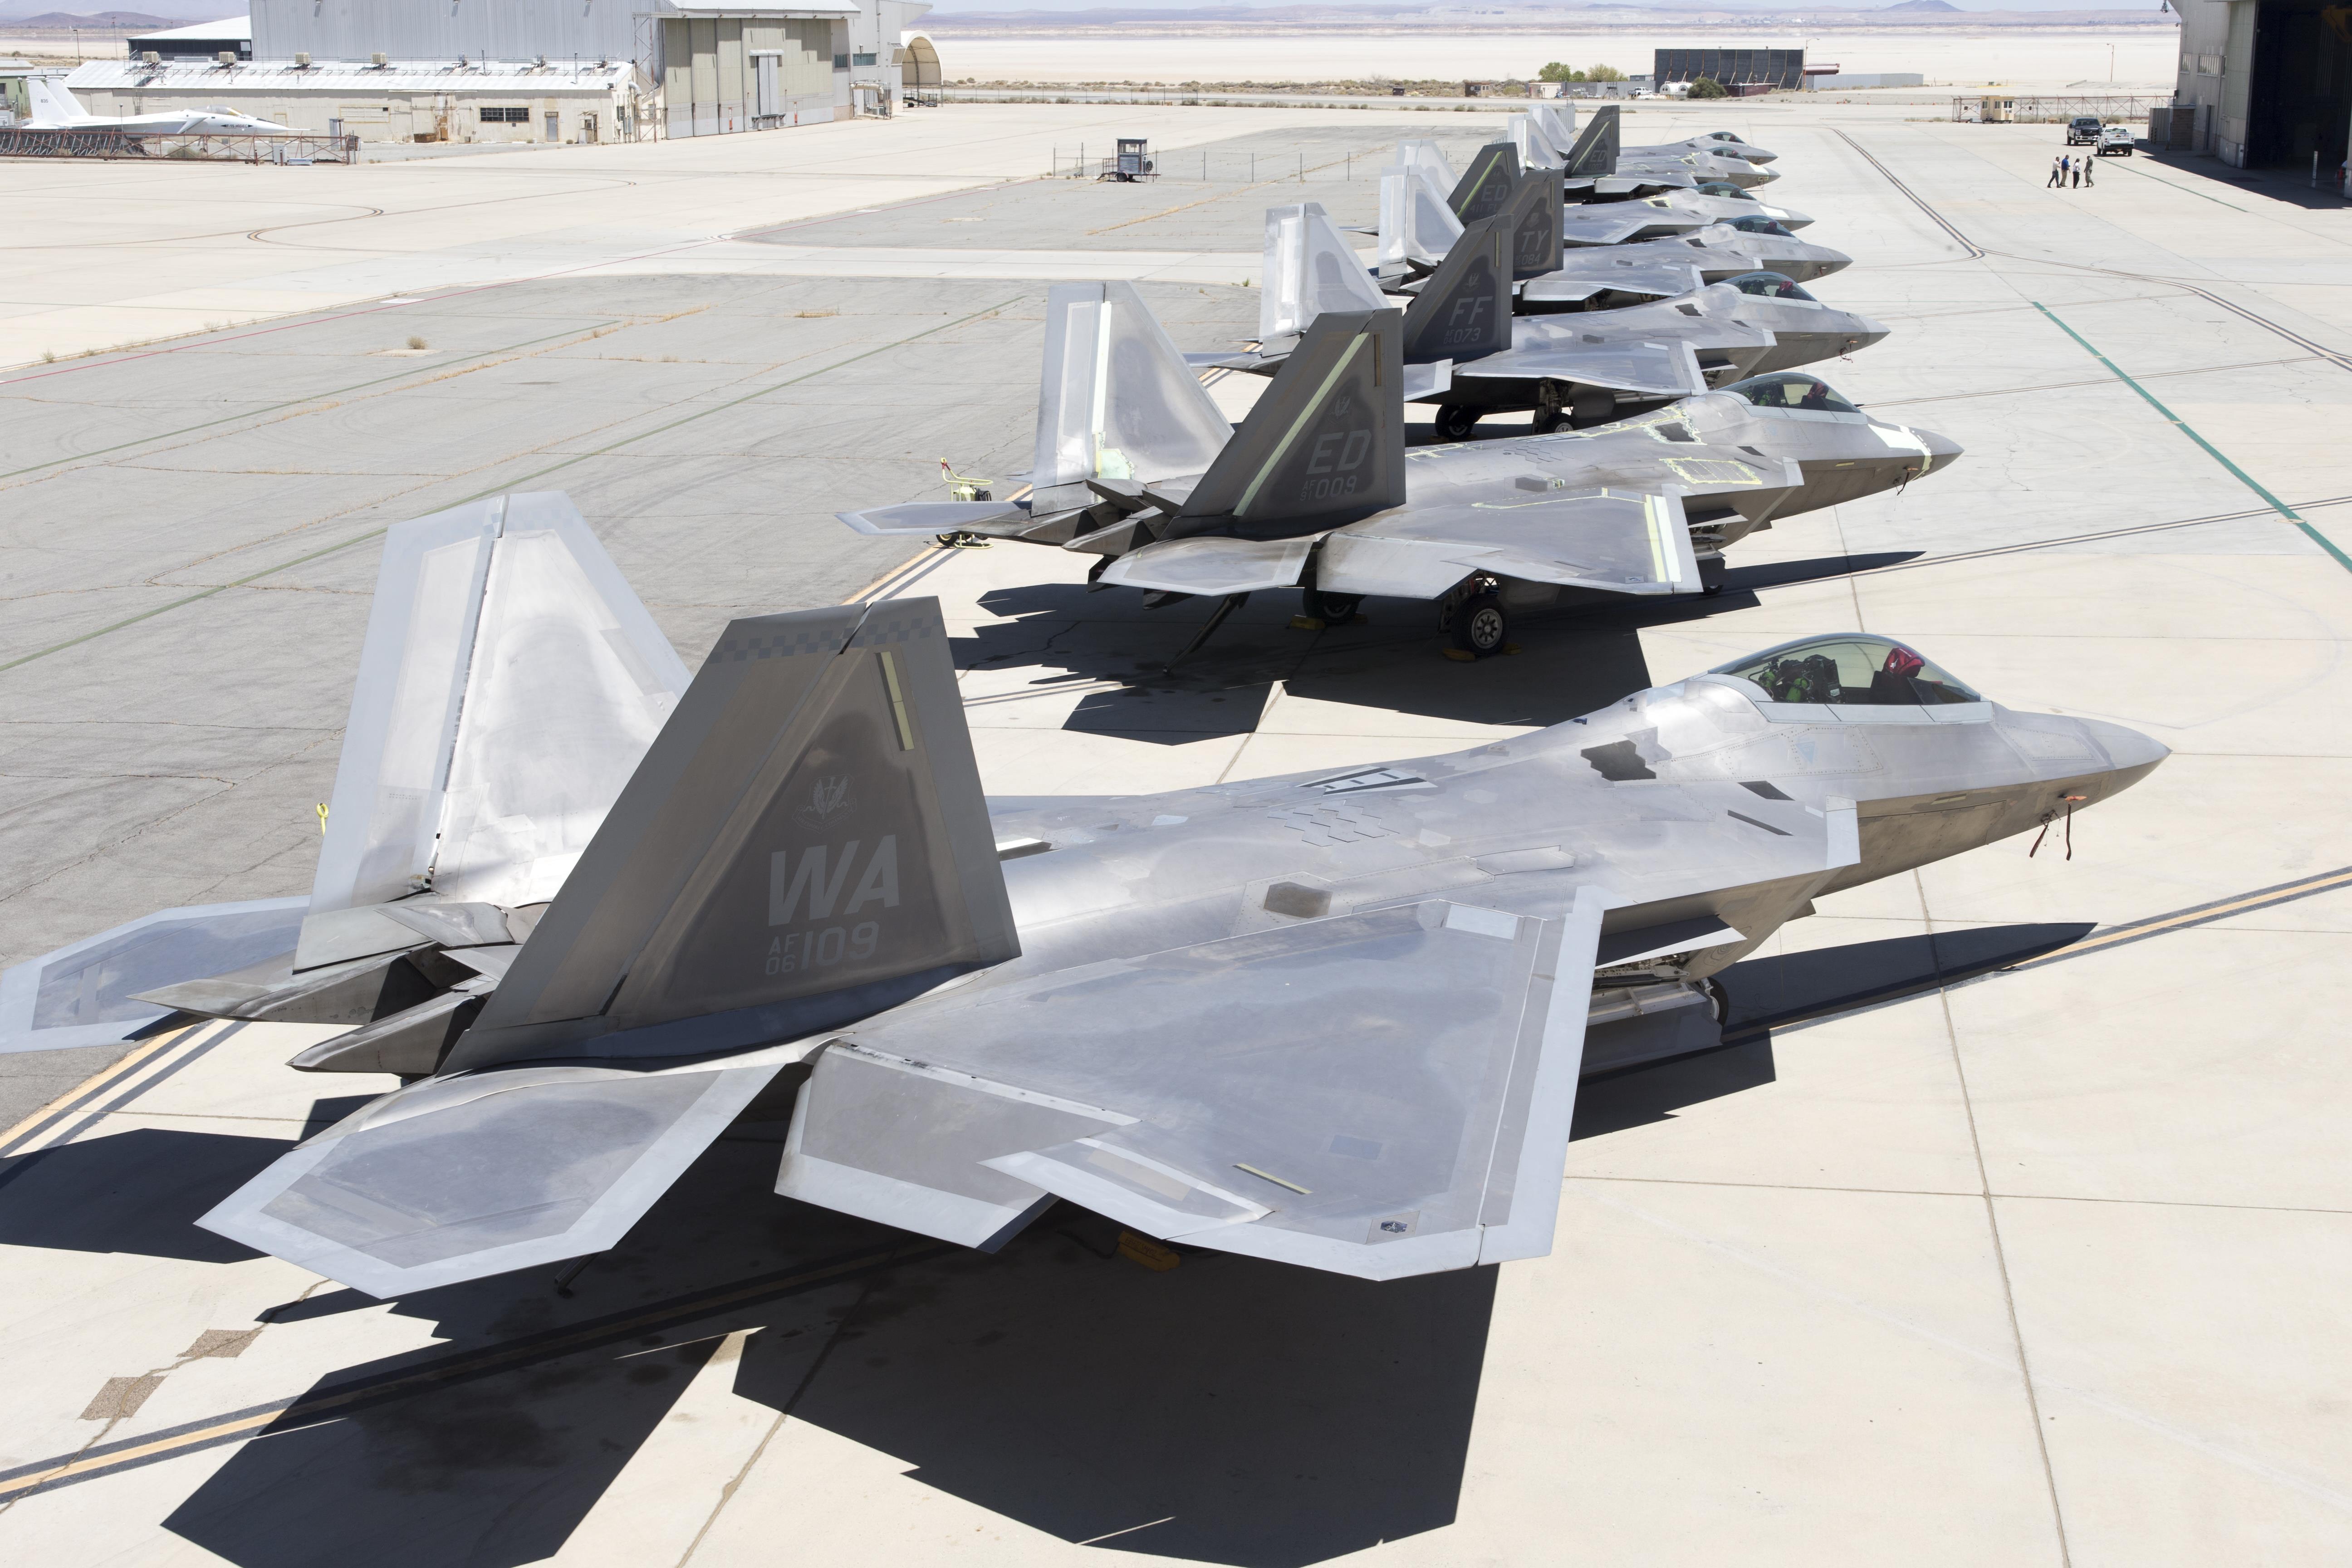 Raptors Converge On F-22 Ctf As It Prepares To Move > Edwards Air Force  Base > News” loading=”lazy” style=”width:100%;text-align:center;” /><small style=